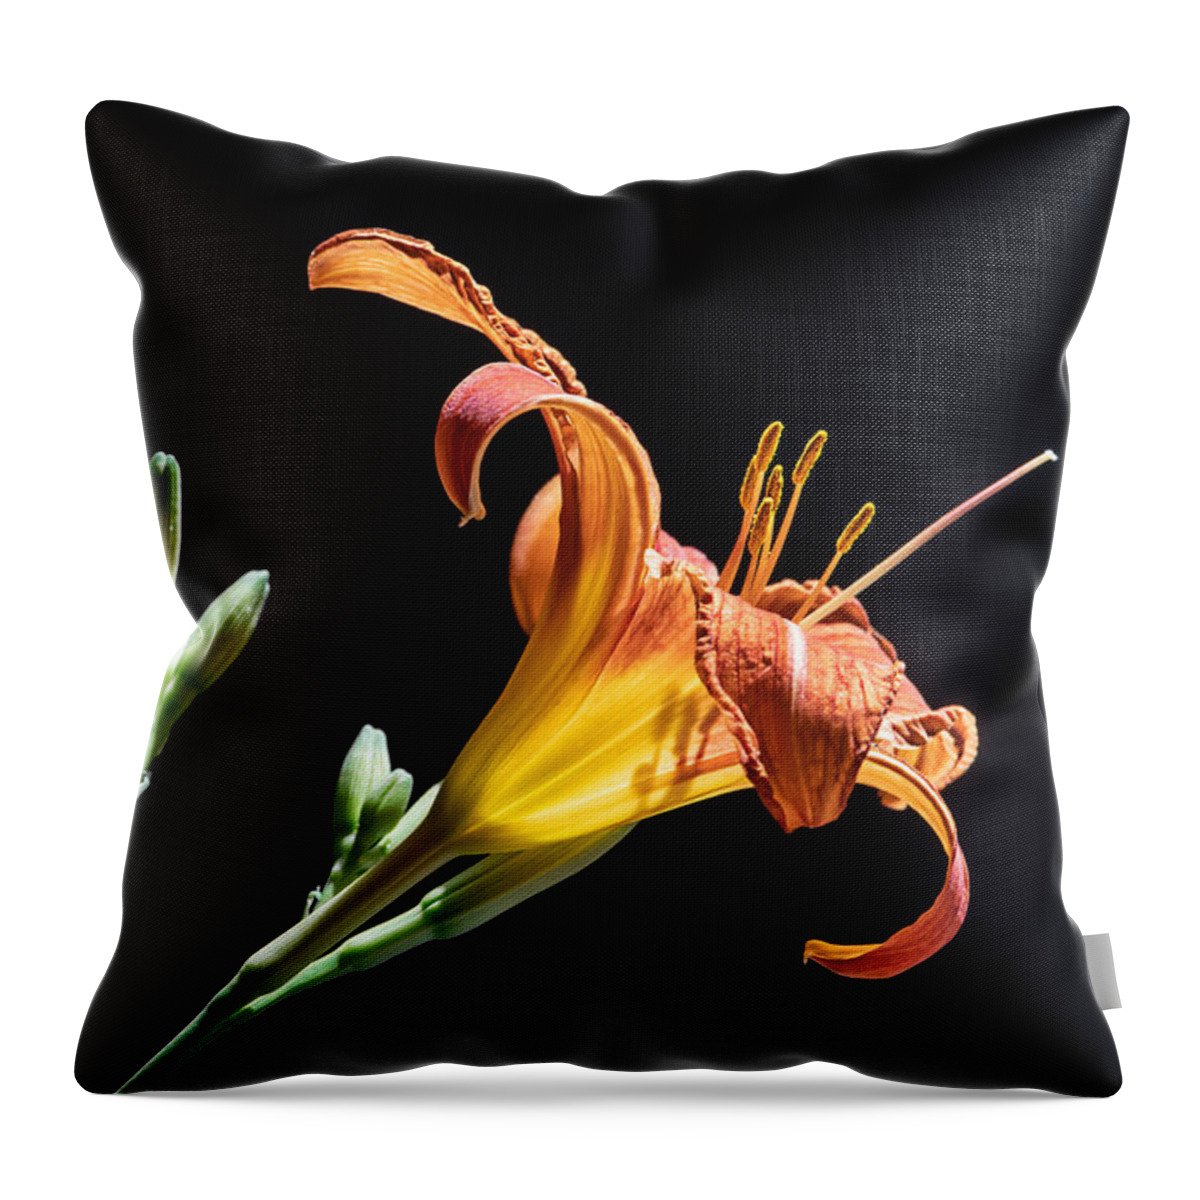 Floral Throw Pillow featuring the photograph Just Another Day by Maggie Terlecki